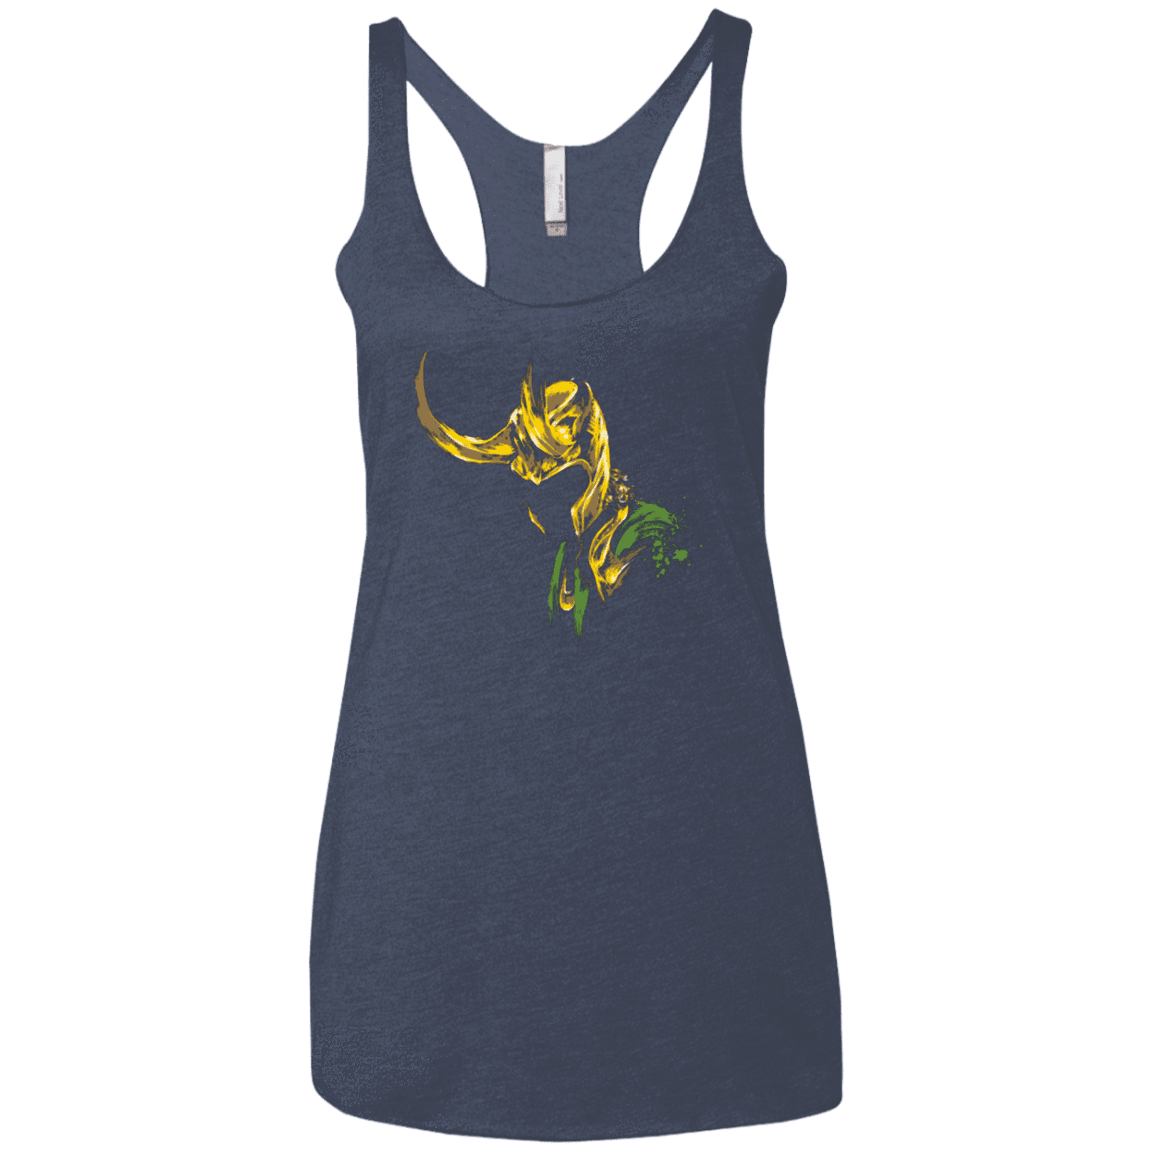 T-Shirts Vintage Navy / X-Small PRINCE OF MISCHIEF Women's Triblend Racerback Tank